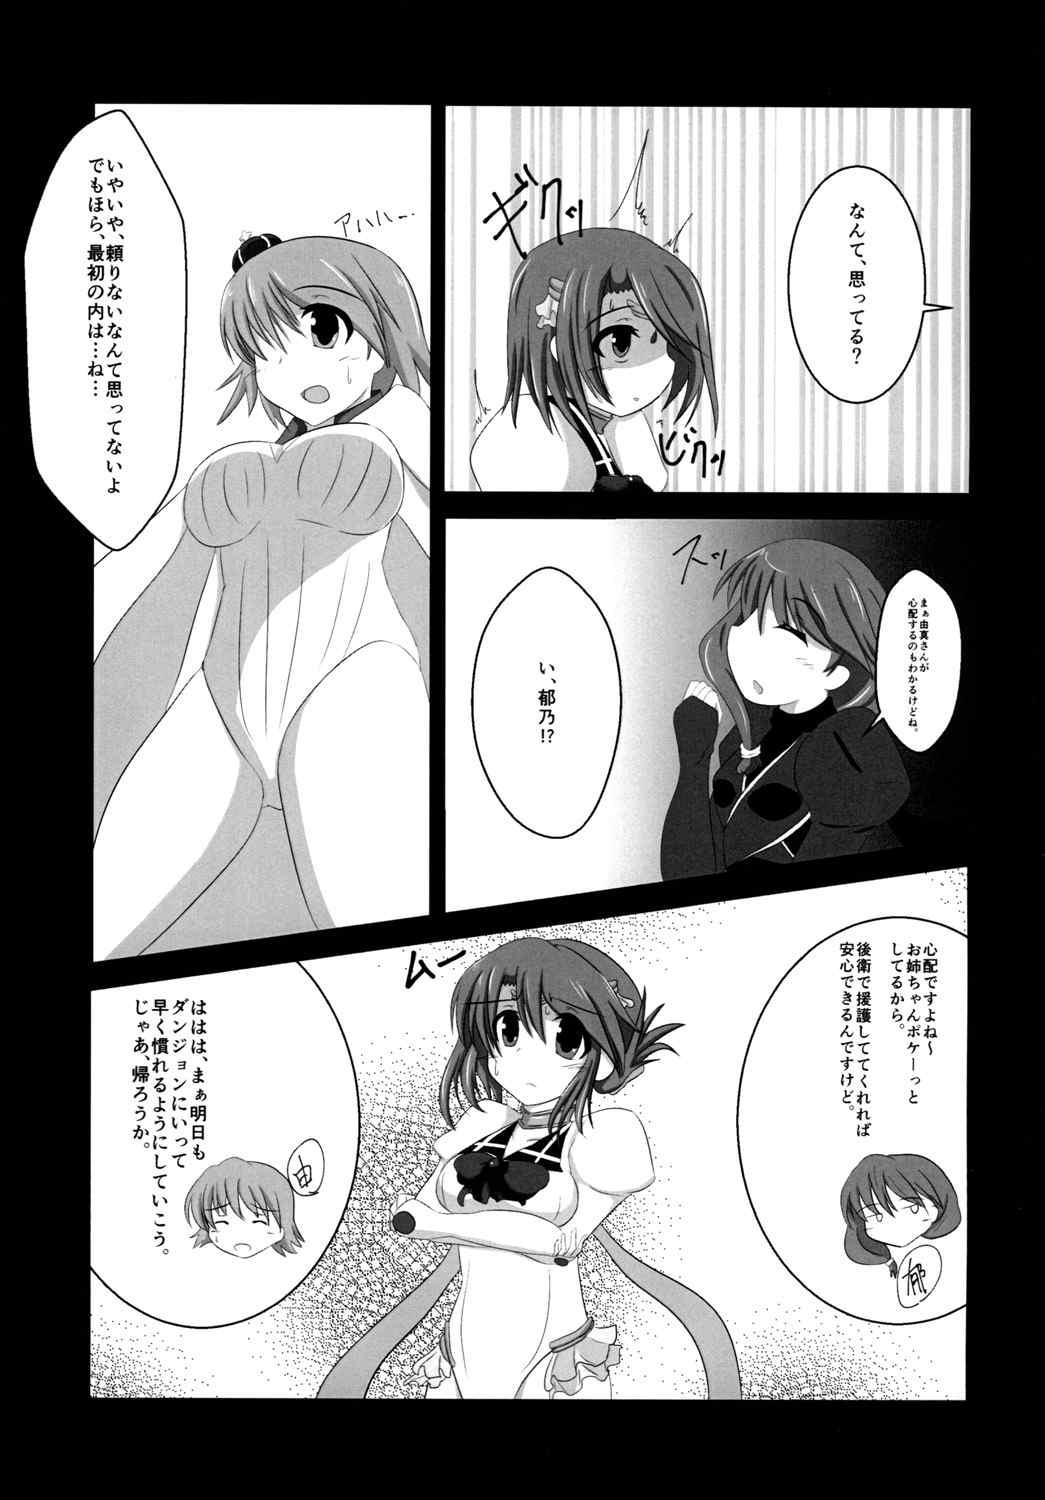 Tites Manaka Lost - Toheart2 Cheating Wife - Page 5